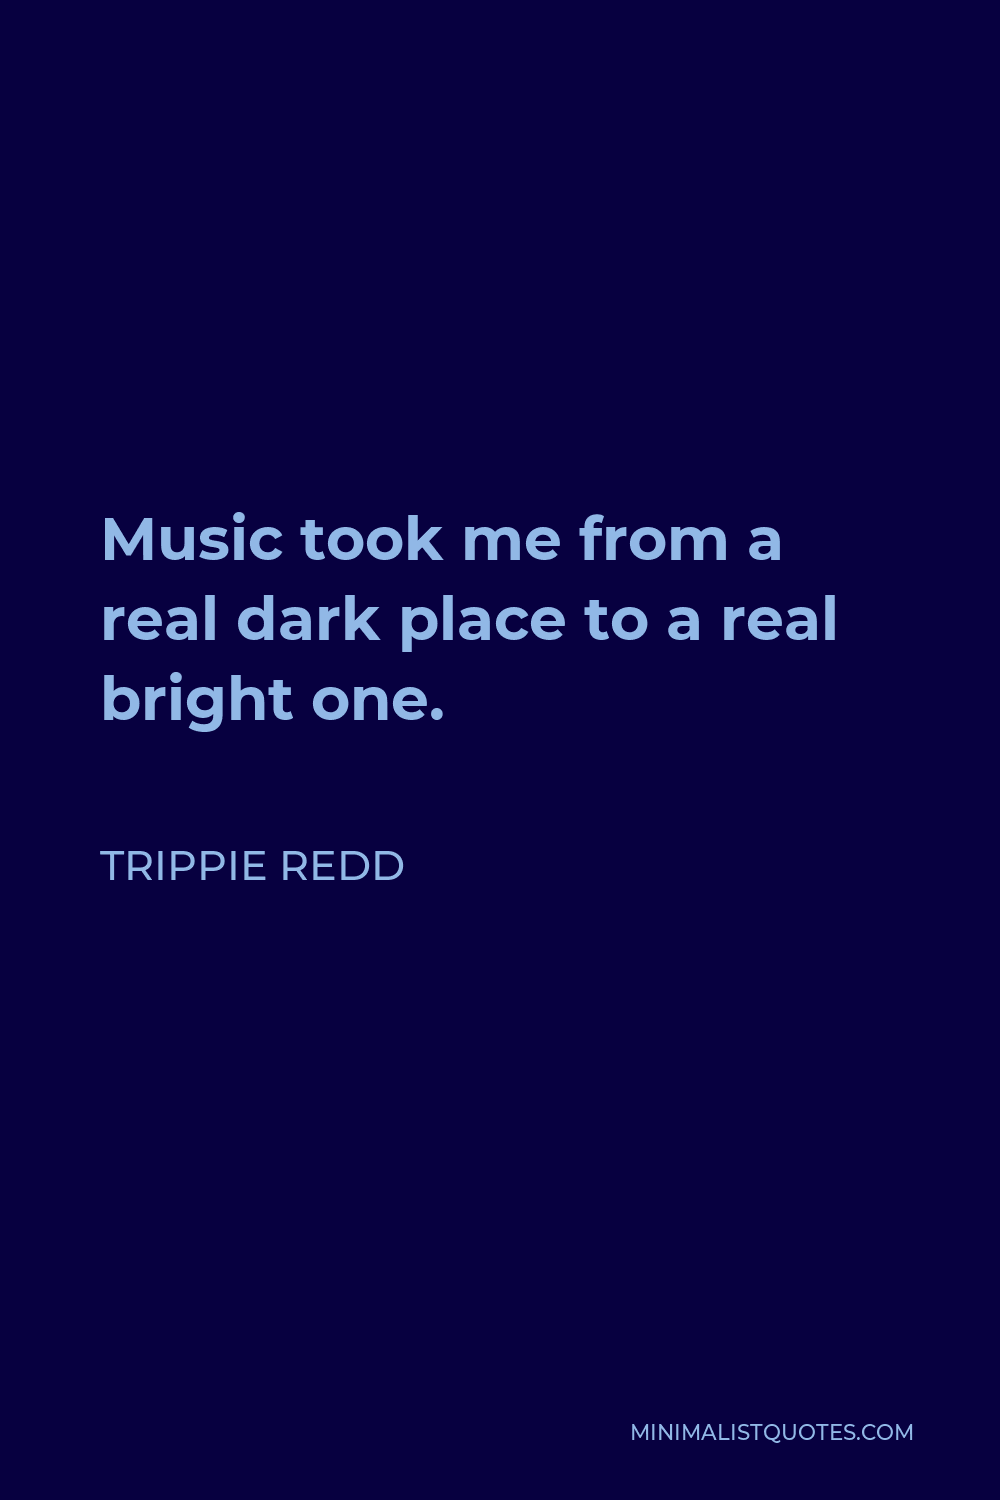 Trippie Redd Quote - Music took me from a real dark place to a real bright one.